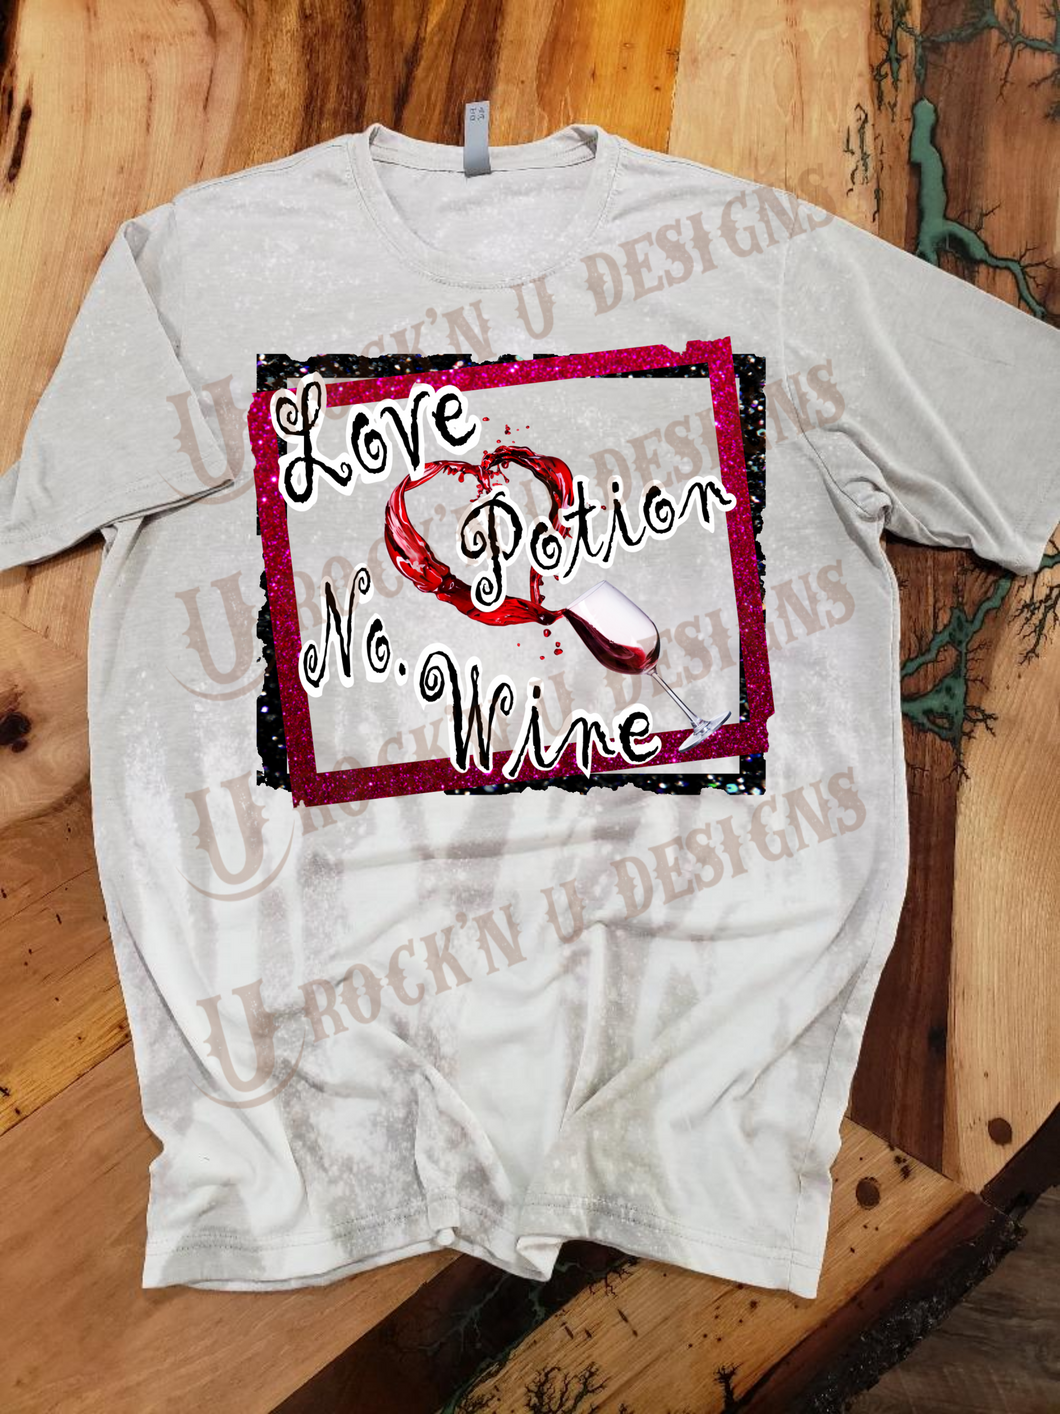 Love Potion No.9 Custom Bleached Graphic T-shirt